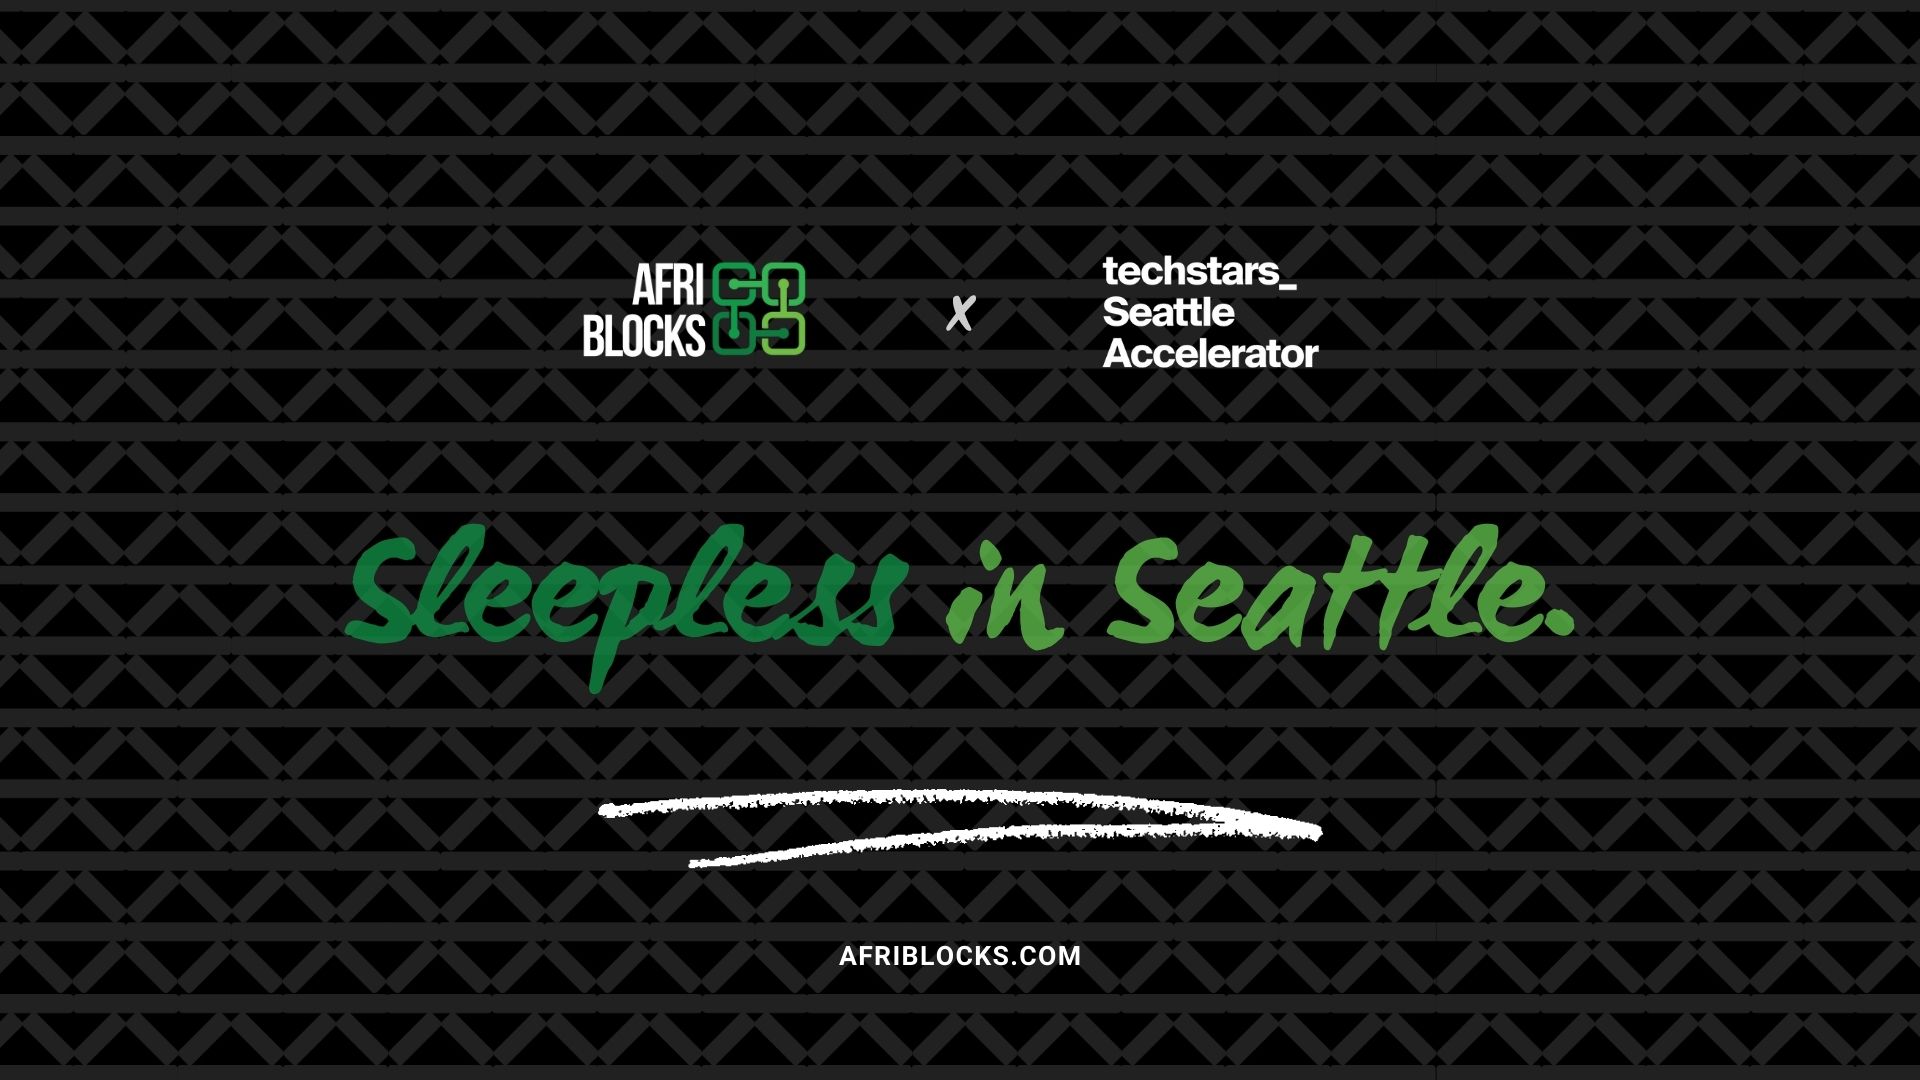 Excitement as AfriBlocks Graduates From TechStars Seattle and Makes History